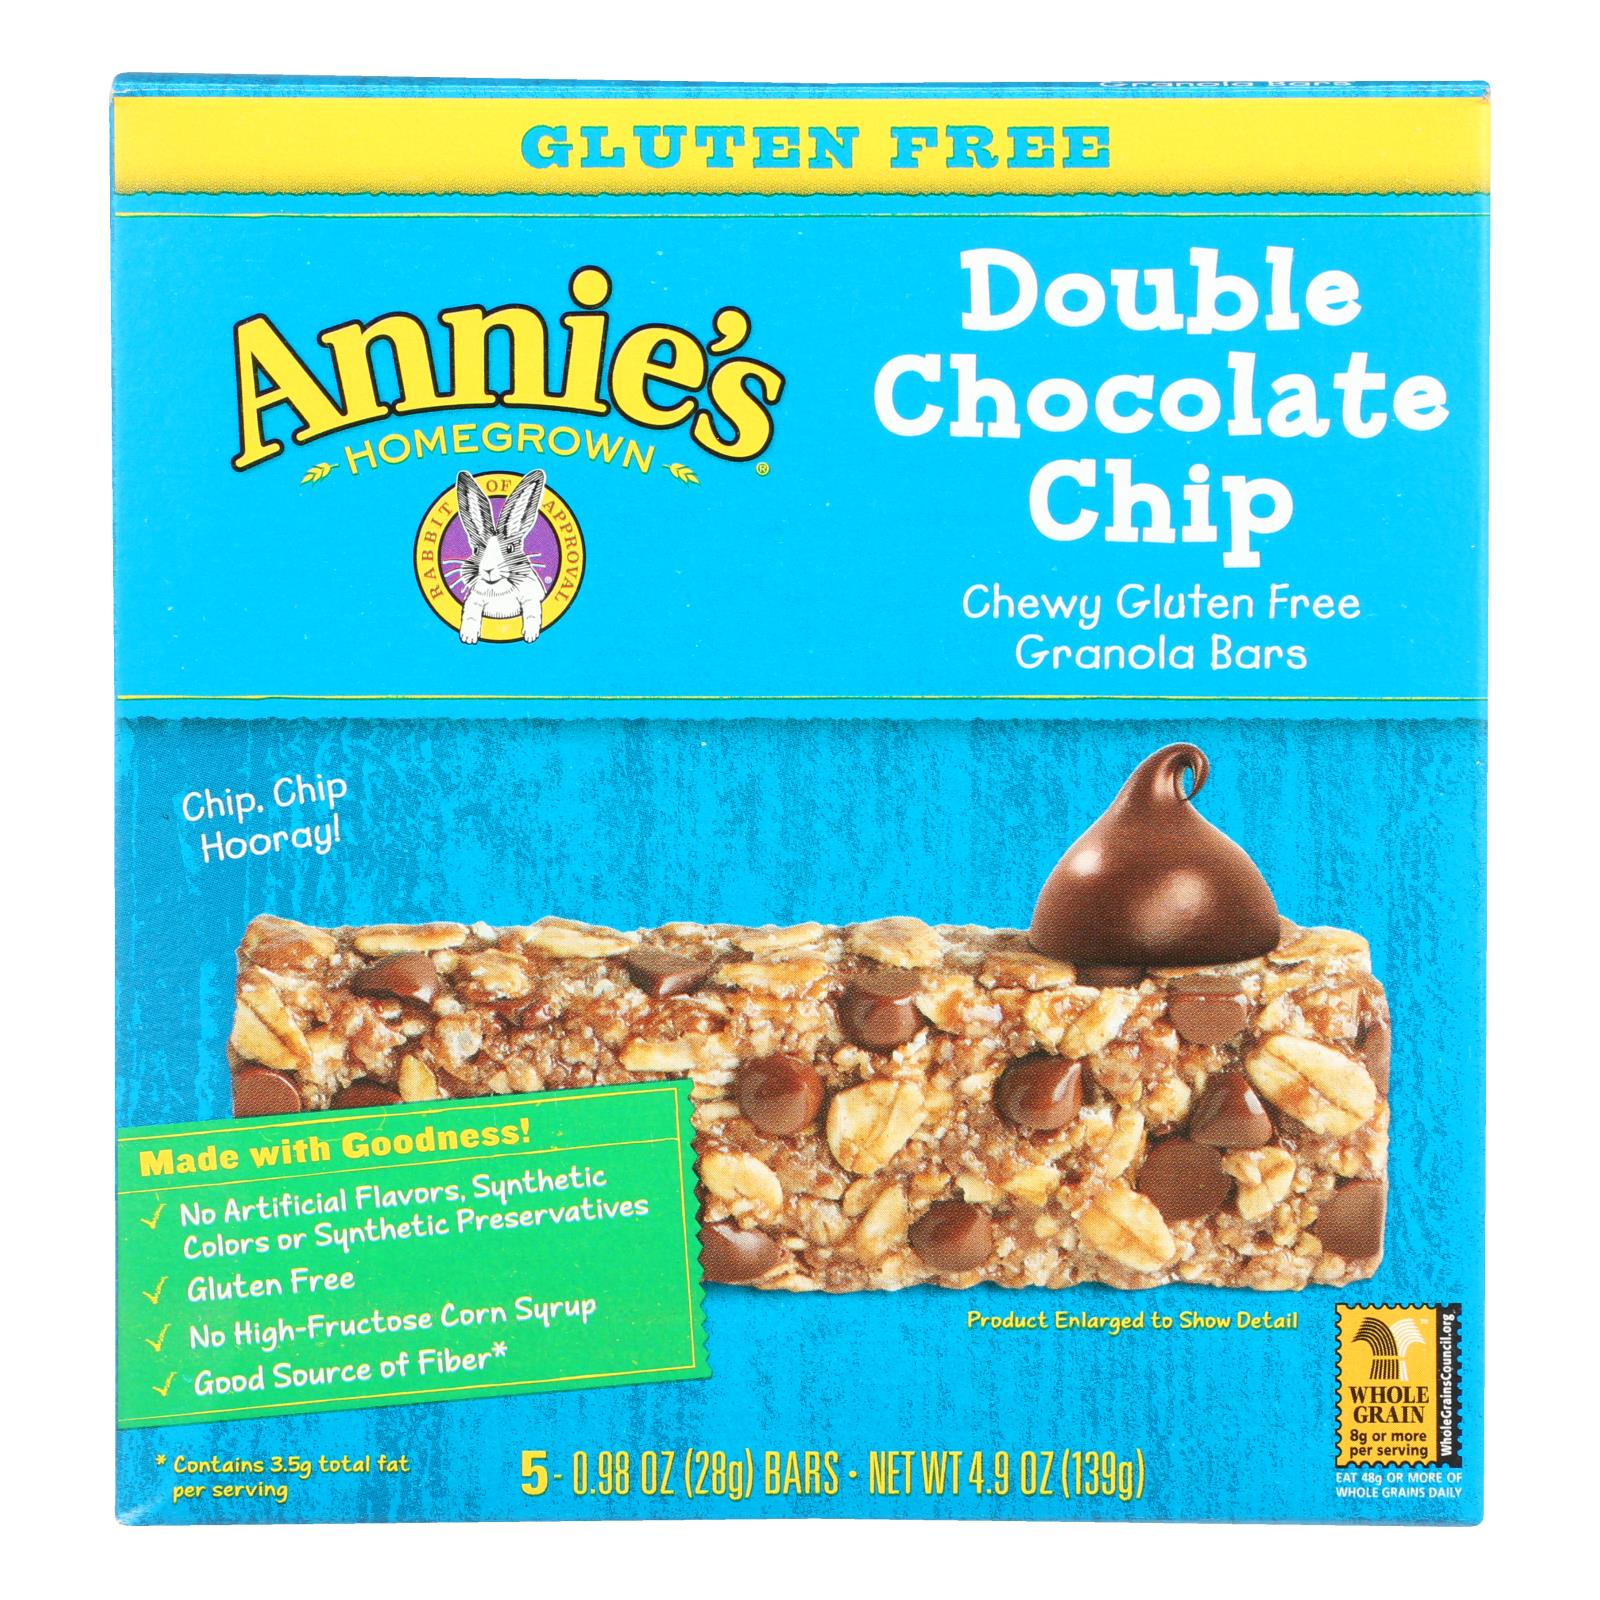 Annie'S Homegrown, Annie's Homegrown Gluten Free Granola Bars Double Chocolate Chip - Case of 12 - 4.9 oz. (Pack of 12)